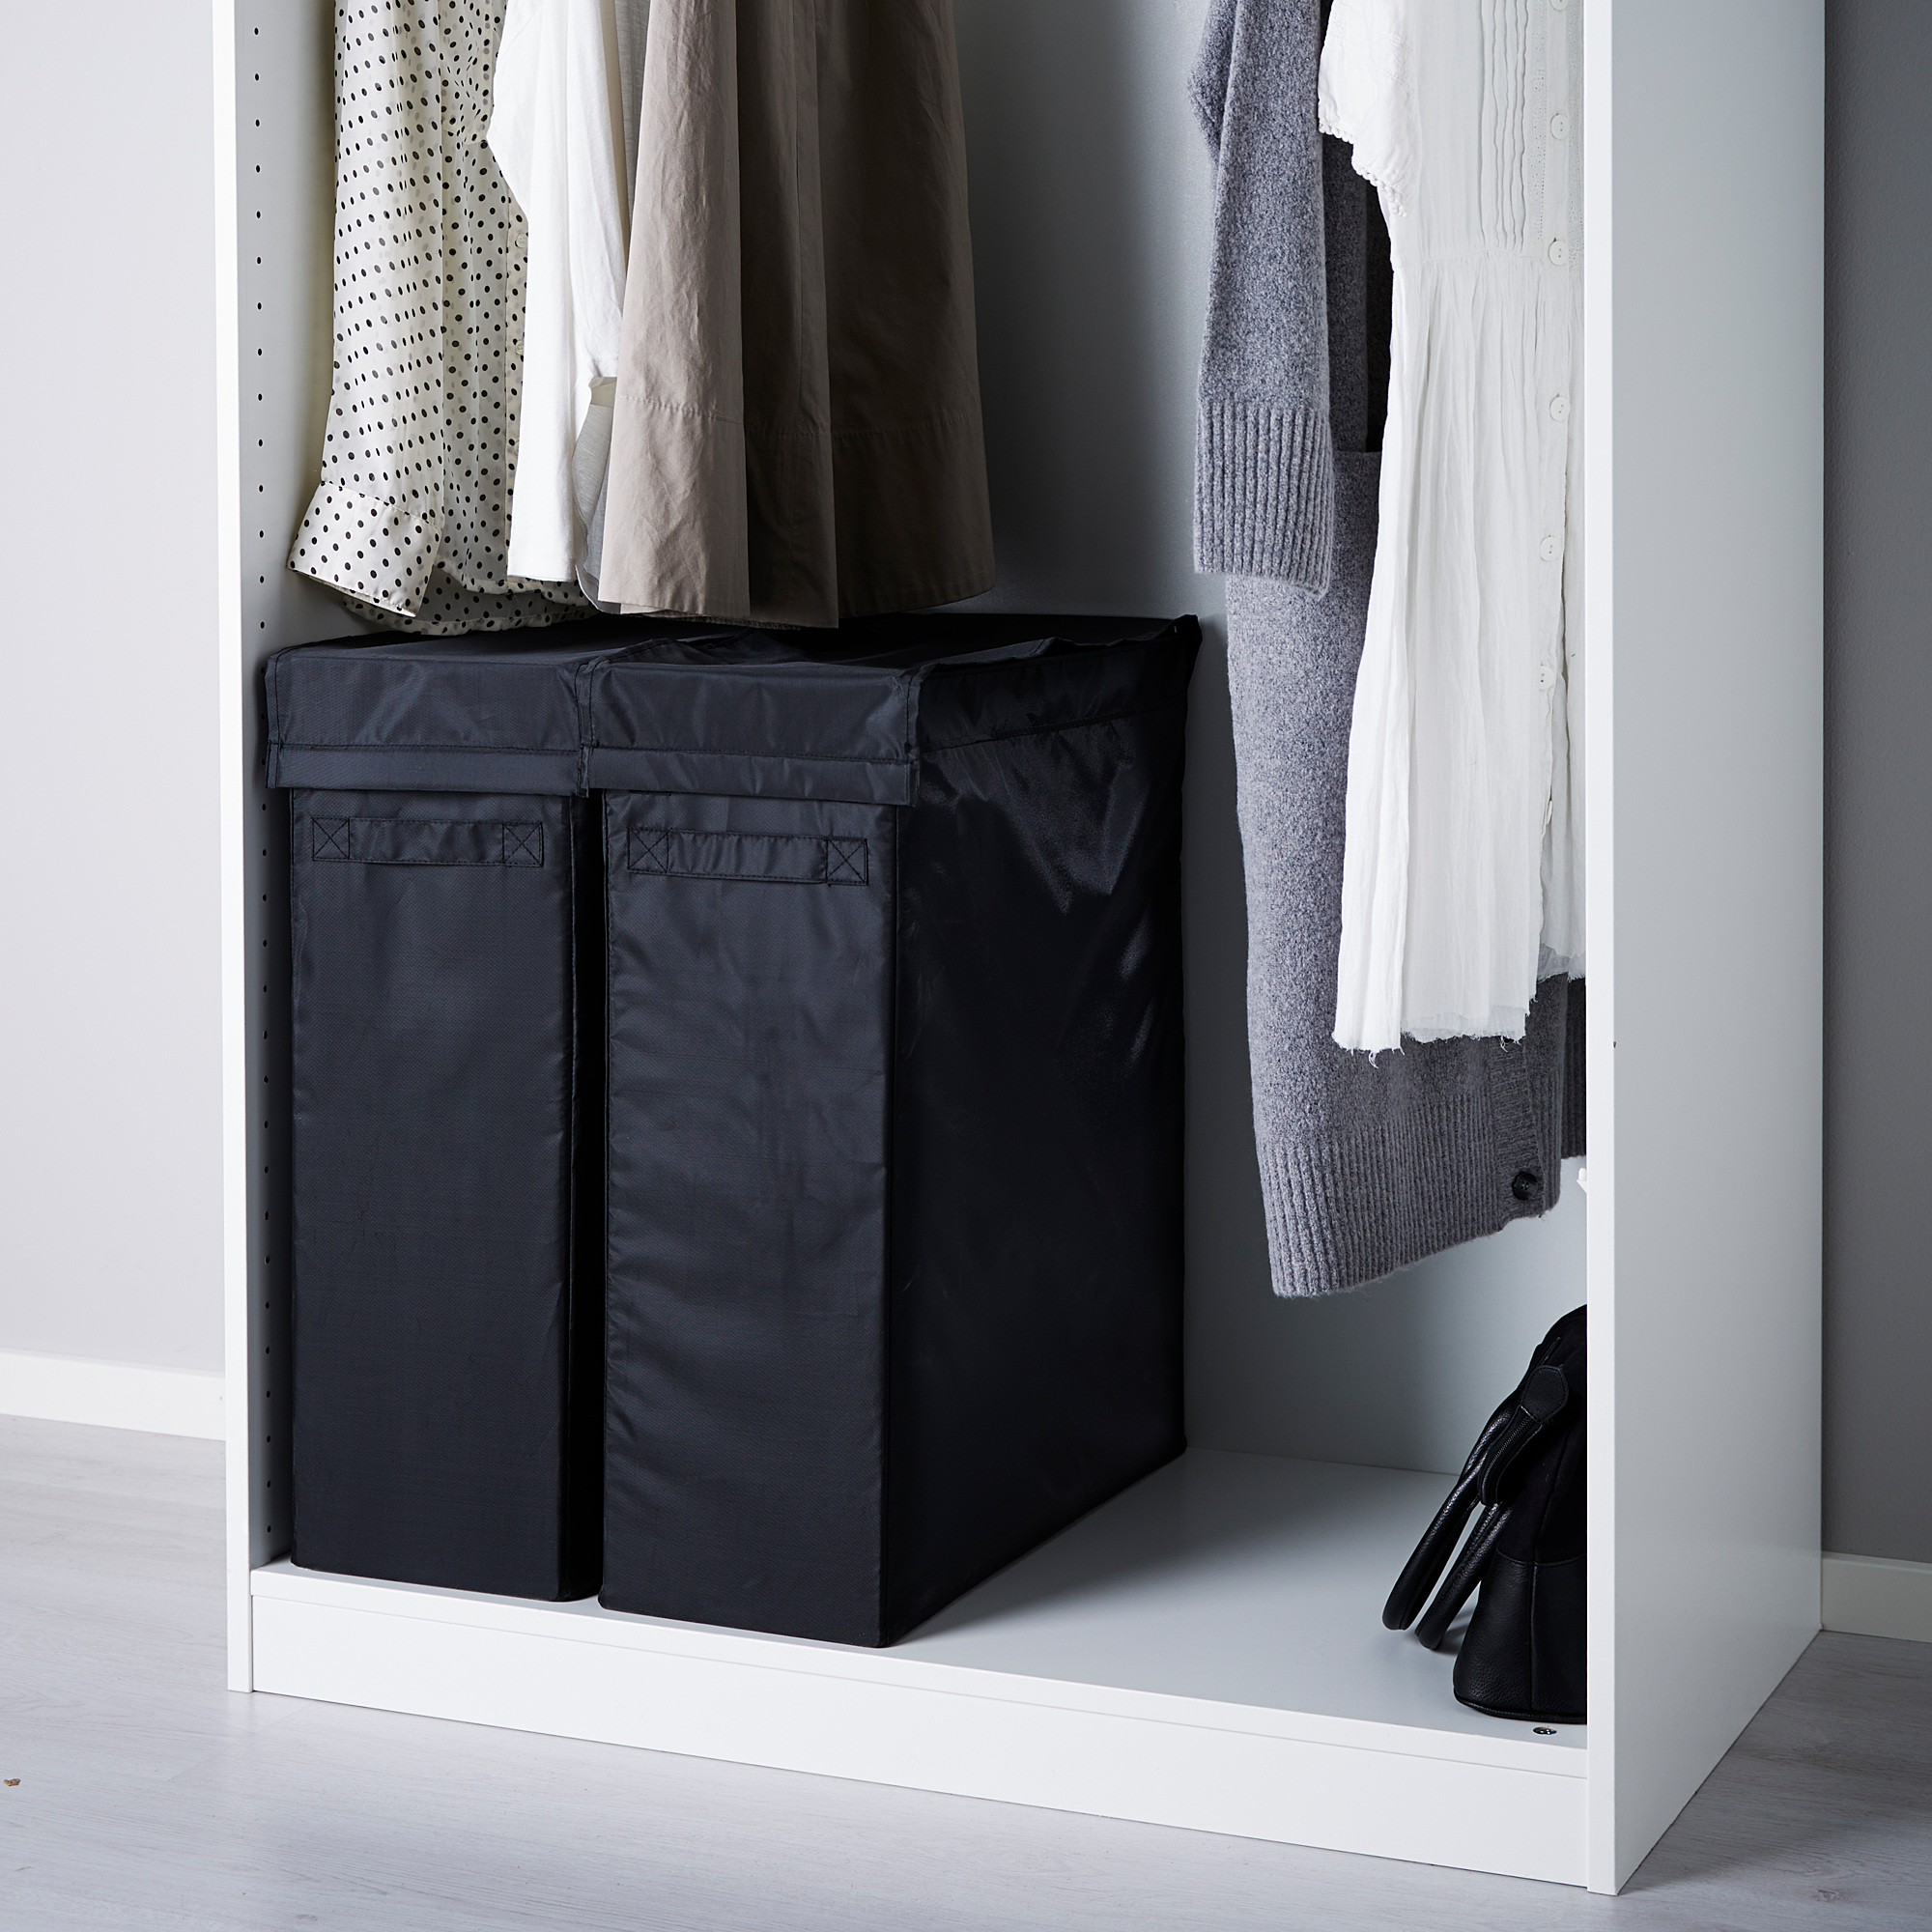 SKUBB laundry bag with stand